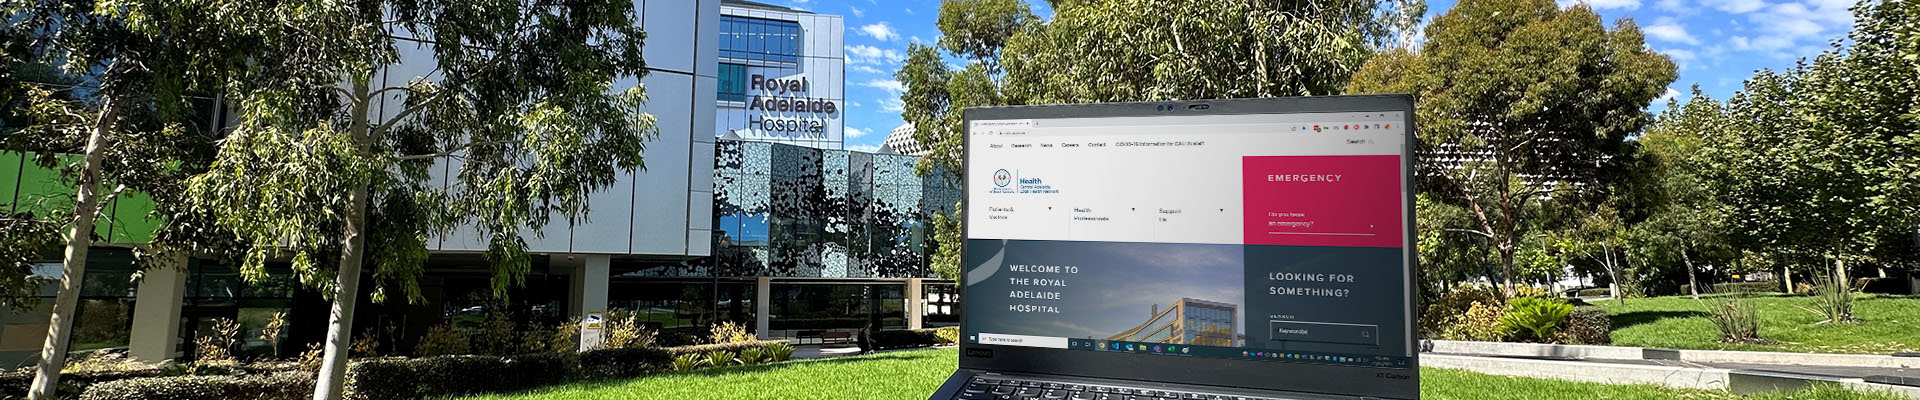 Laptop overlooking the Royal Adelaide Hospital with trees in the background.